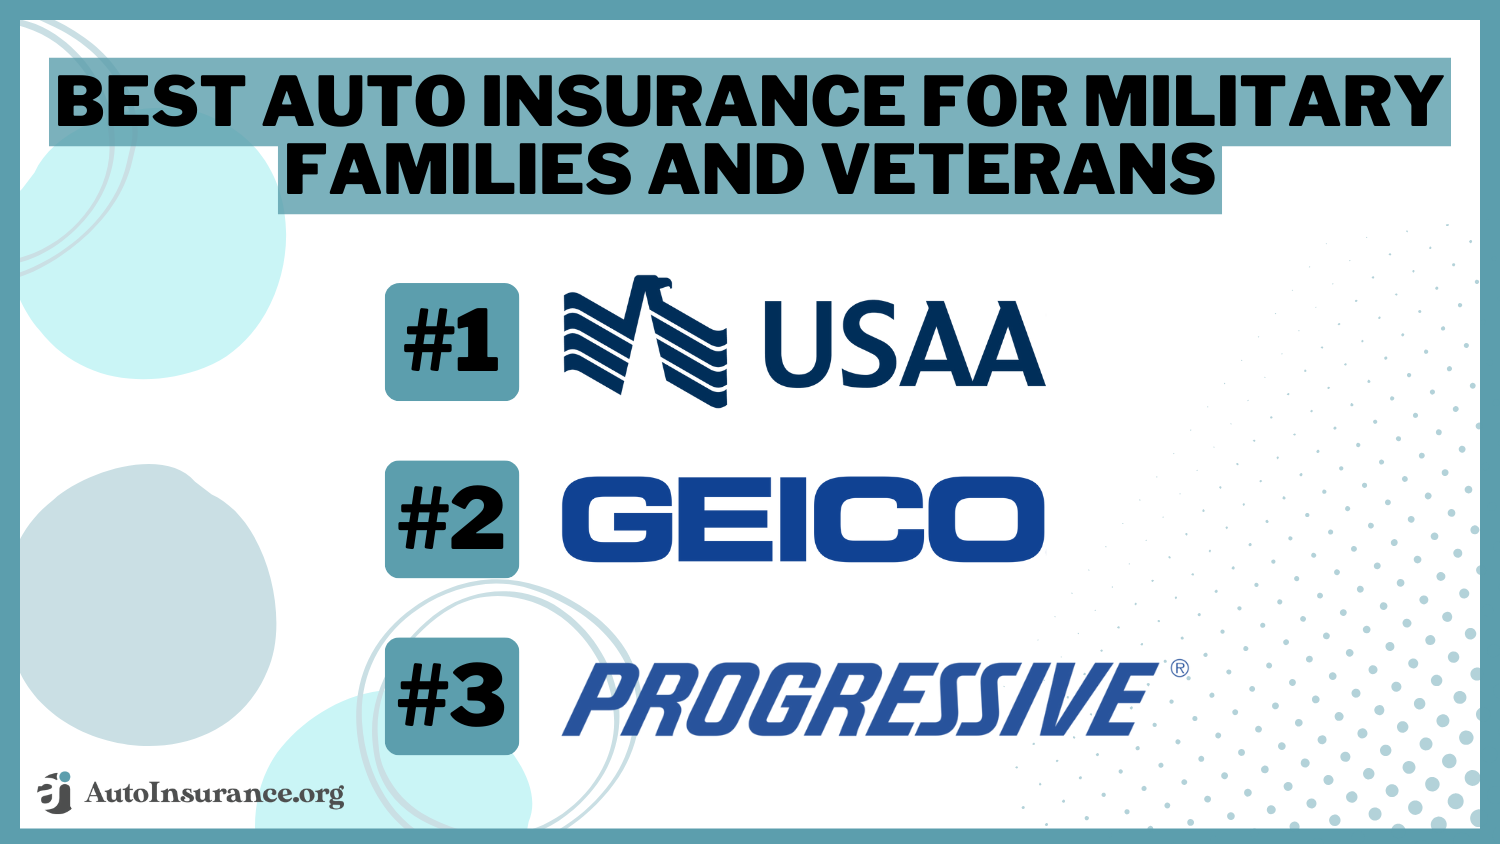 Best Auto Insurance for Military Families and Veterans: USAA, Geico, Progressive